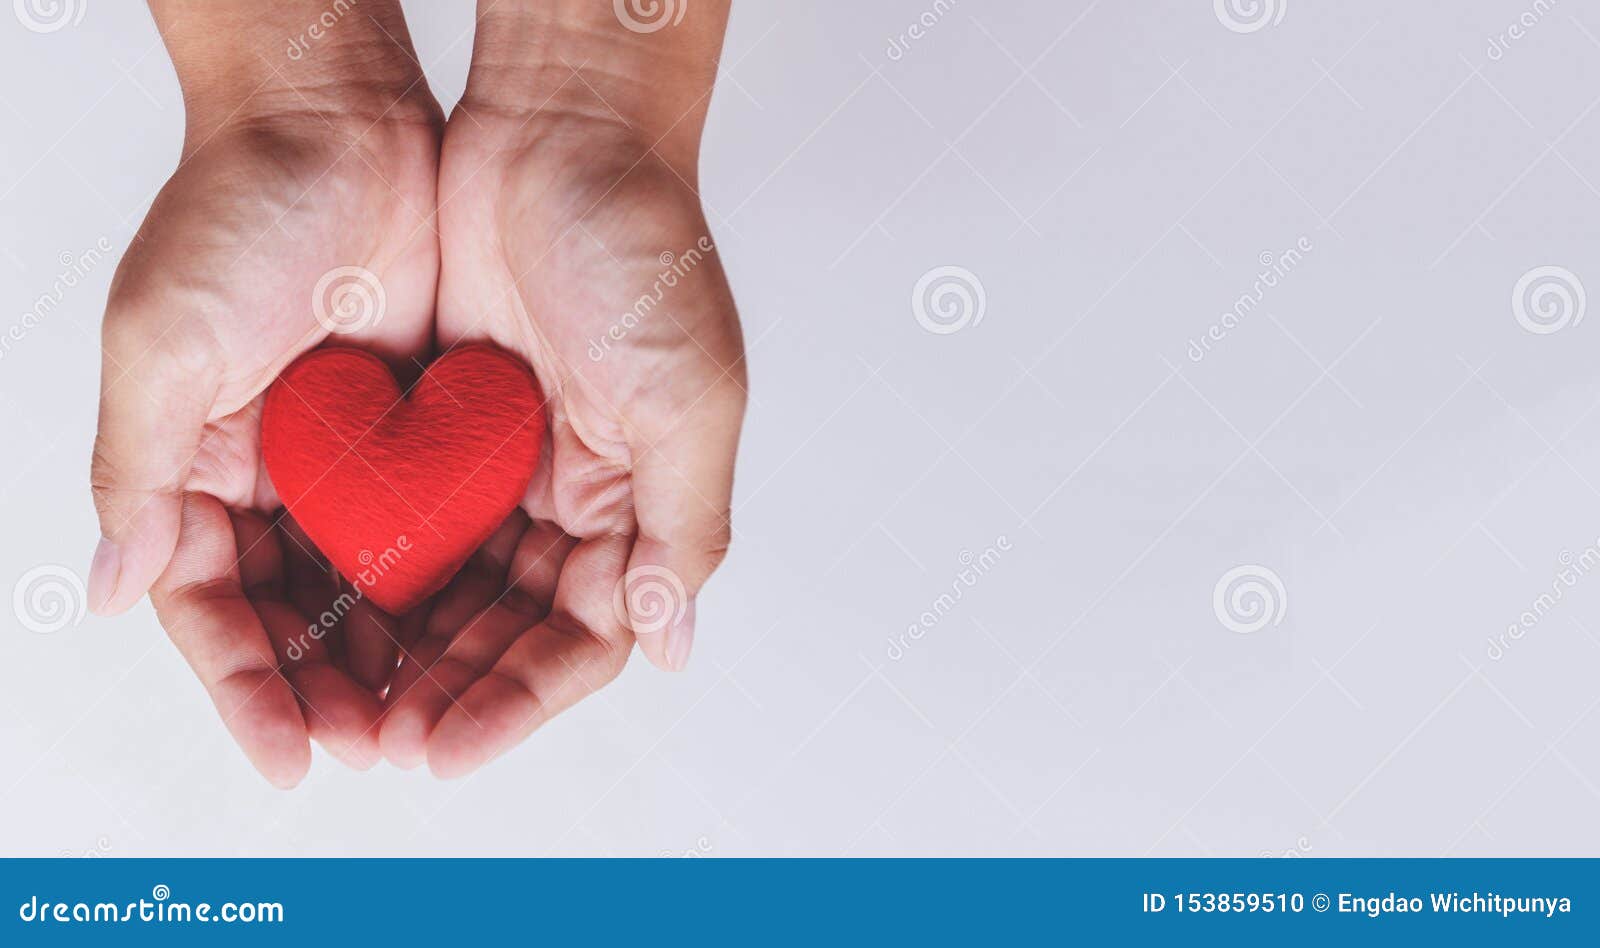 Heart On Hand For Philanthropy Woman Holding Red Heart In Hands For Valentines Day Or Donate Help Give Love Warmth Take Care Stock Photo Image Of Blood Healthy